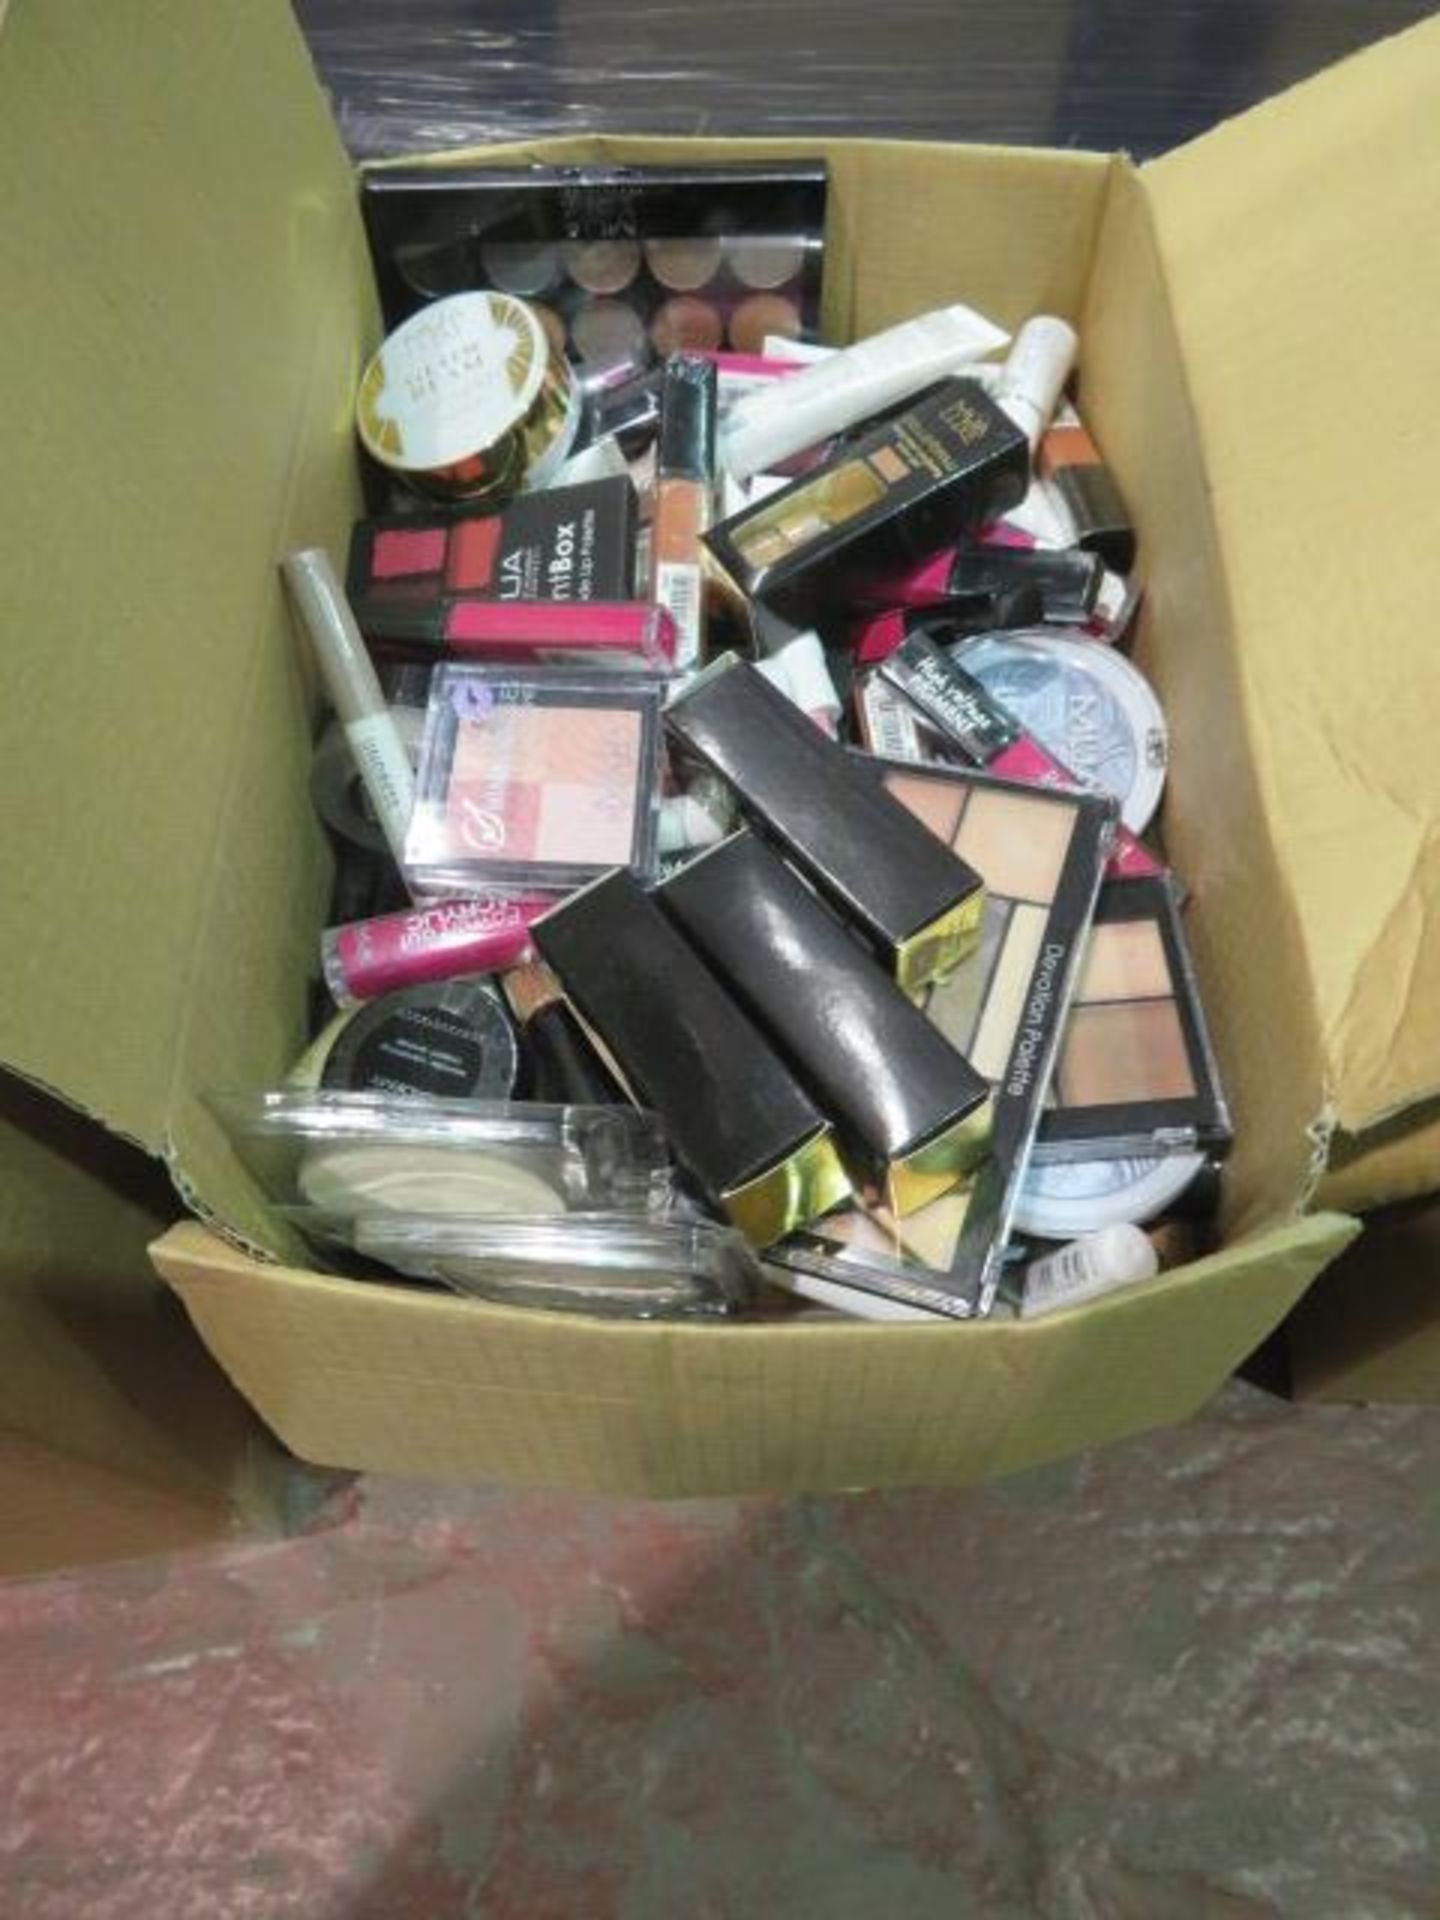 Circa. 200 items of various new make up acadamy make up to include: paintbox multishade lip palette, - Image 3 of 3